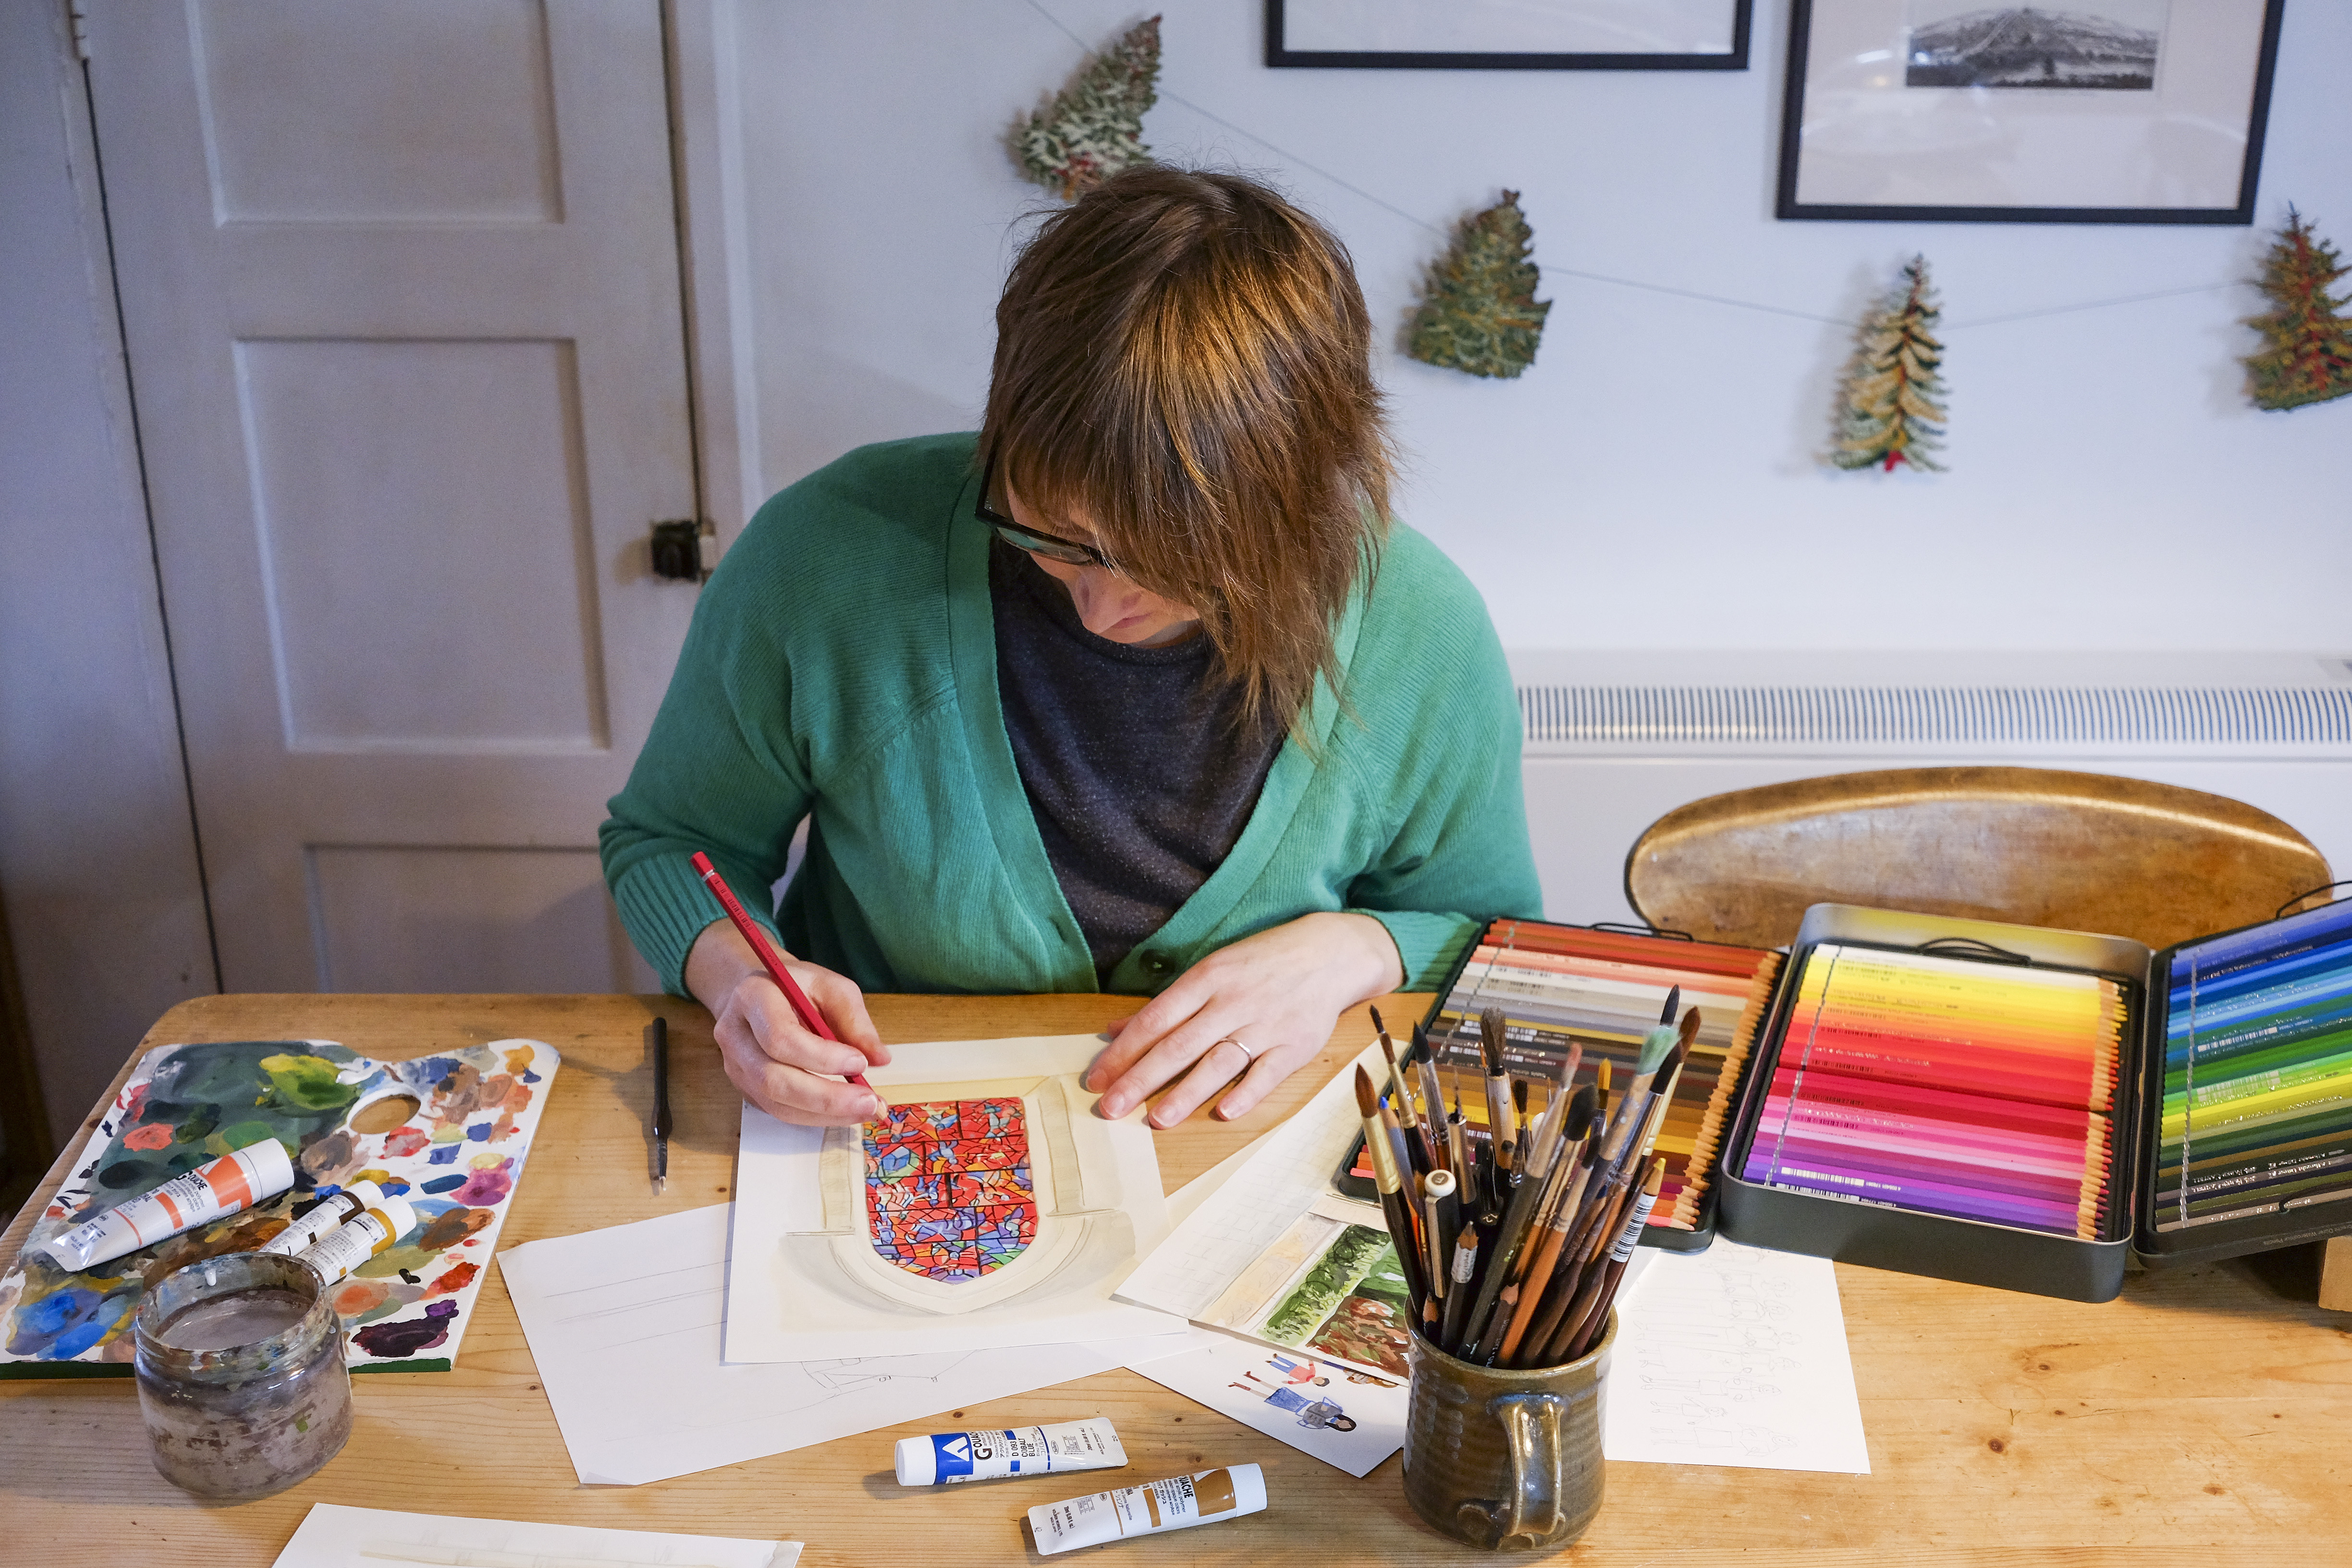 Chloe Robertson, who has brown hair and glasses, colours in her illustration of the Chagall window with a red pencil. The table has pencils, paintbrushes and paints on.